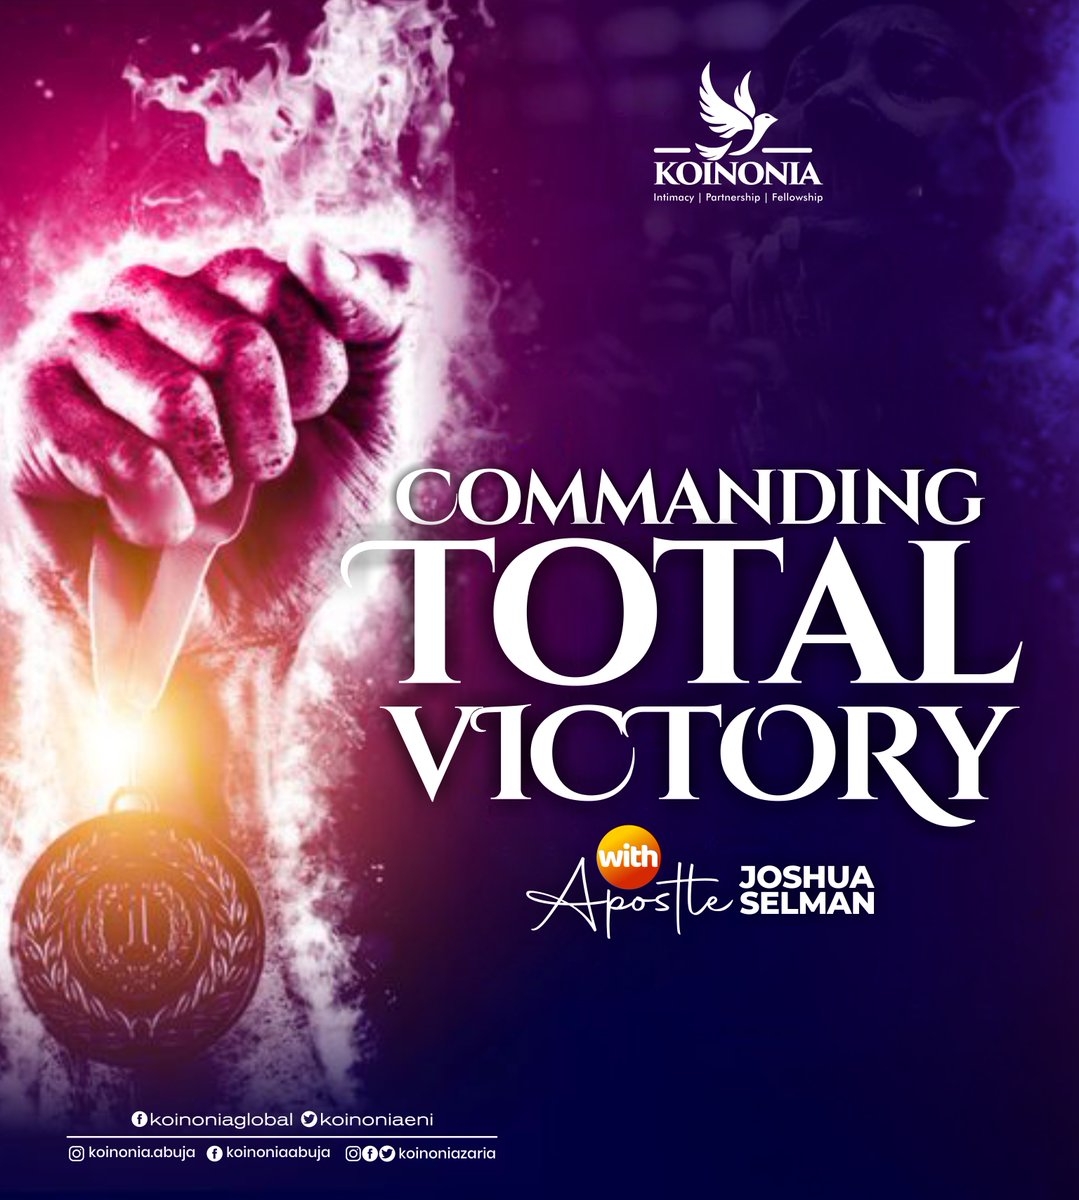 Dear Beloved, kindly click on the link below to download the audio message of “COMMANDING TOTAL VICTORY “ WITH APOSTLE JOSHUA SELMAN.

bit.ly/45j7QL0

#ApostleJoshuaSelman
#CommandingTotalVictory
#KoinoniaUk
#KoinoniaAbuja
#KoinoniaZaria
#KoinoniaGlobal